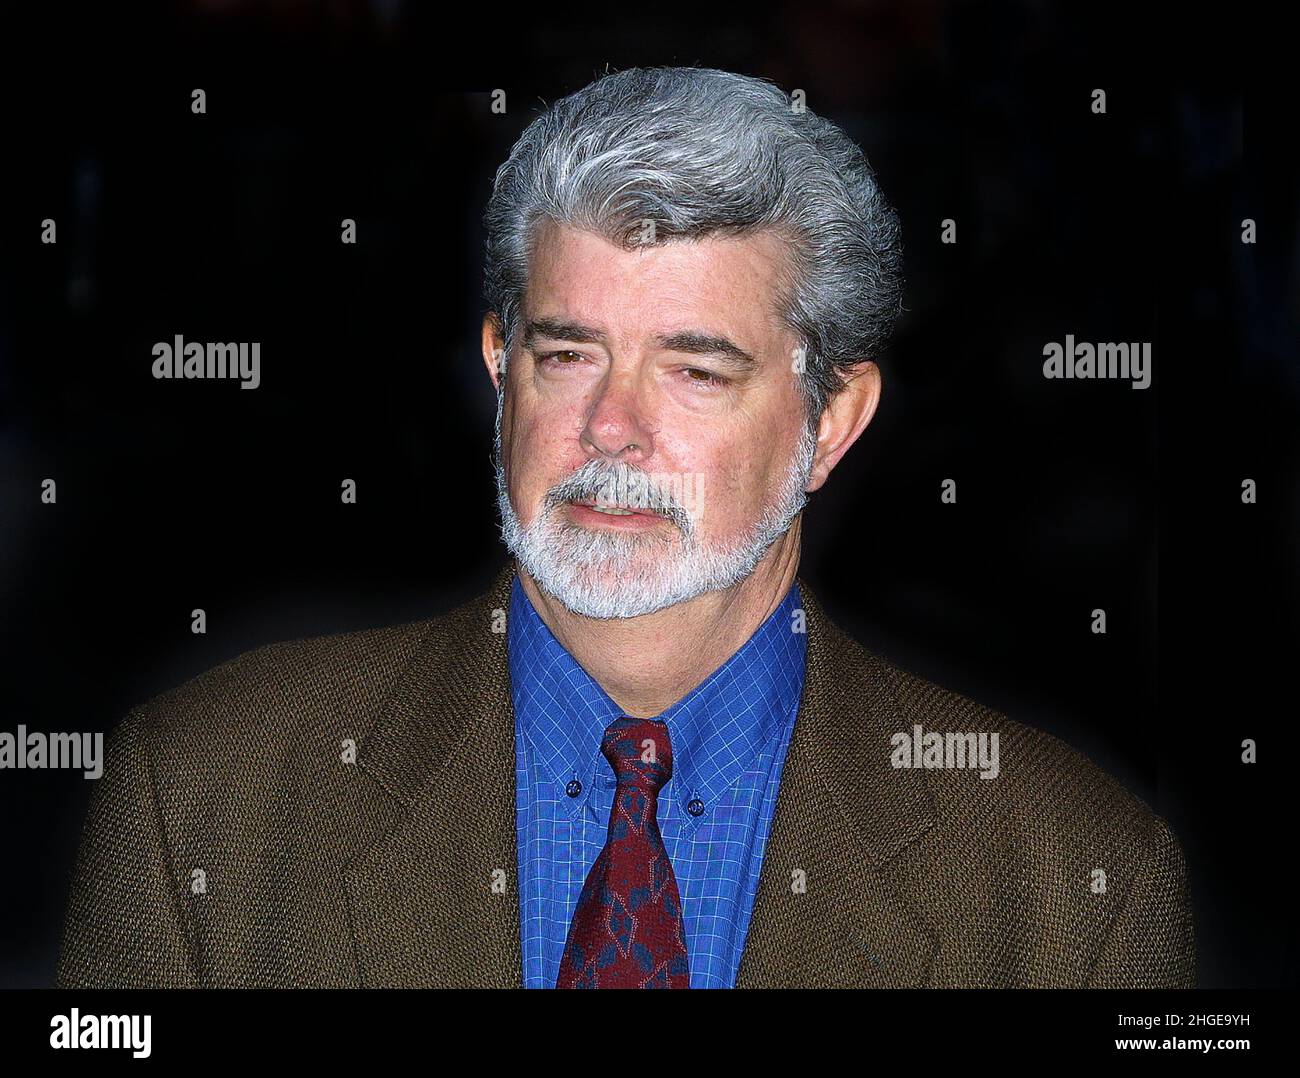 Film director George Lucas at the Star Wars premiere in London 14th May 2002. Stock Photo